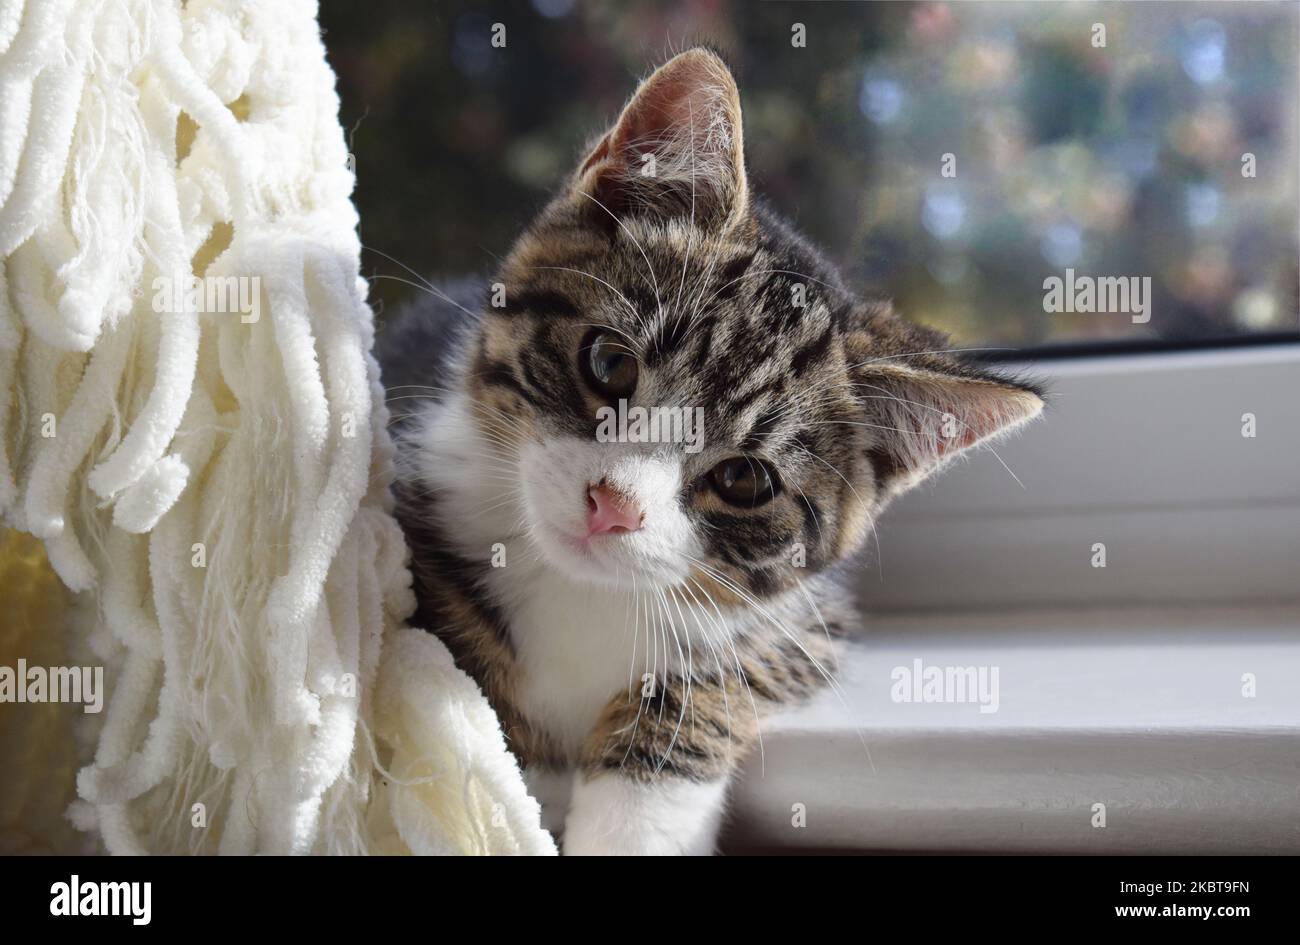 A cute tabby and white domestic shirt hair kitten aged approximately 10 weeks old Stock Photo